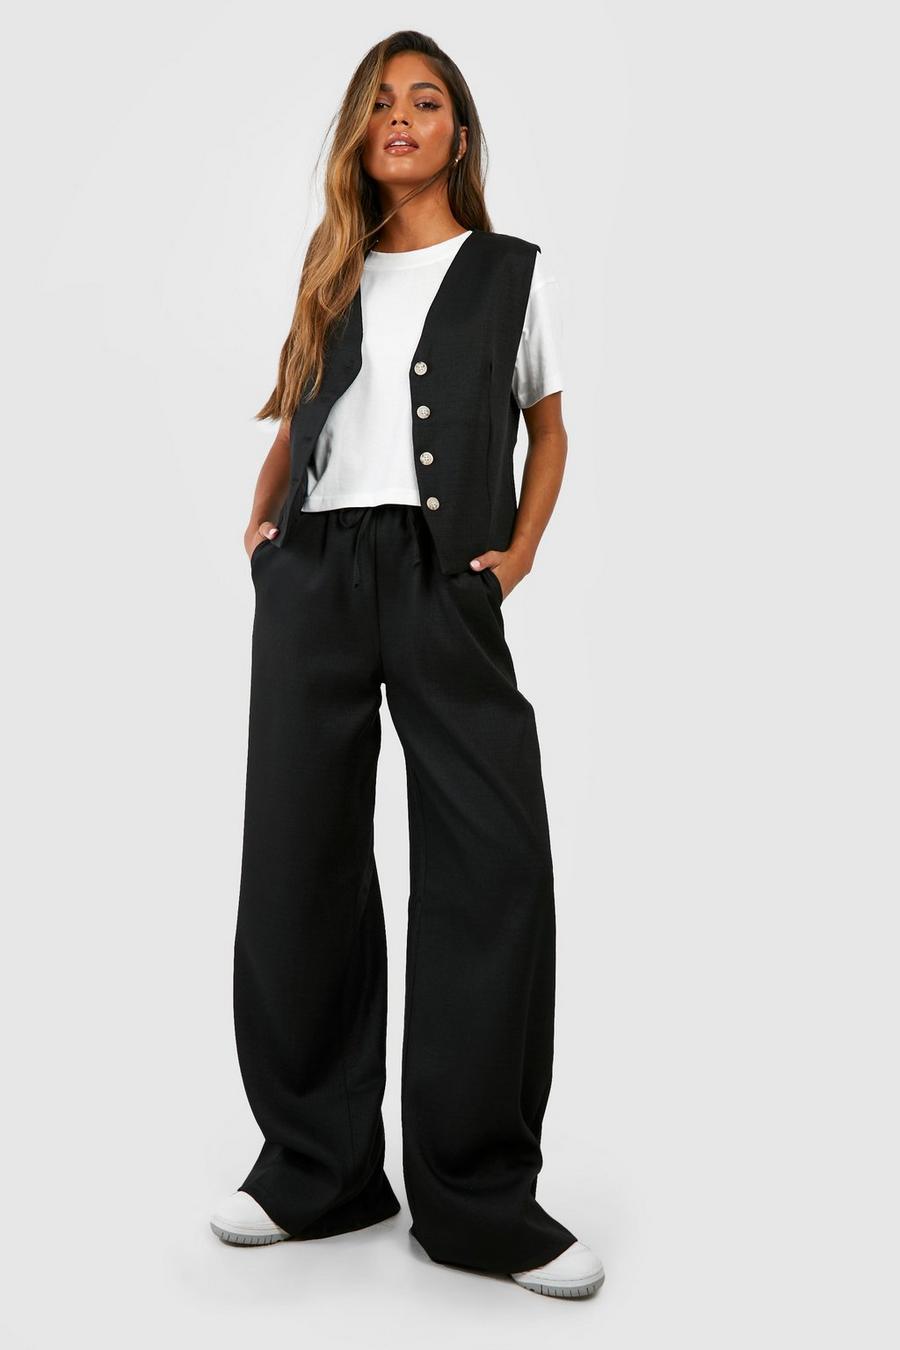 Woven Textured Linen Look Elasticated Waist Trousers  image number 1